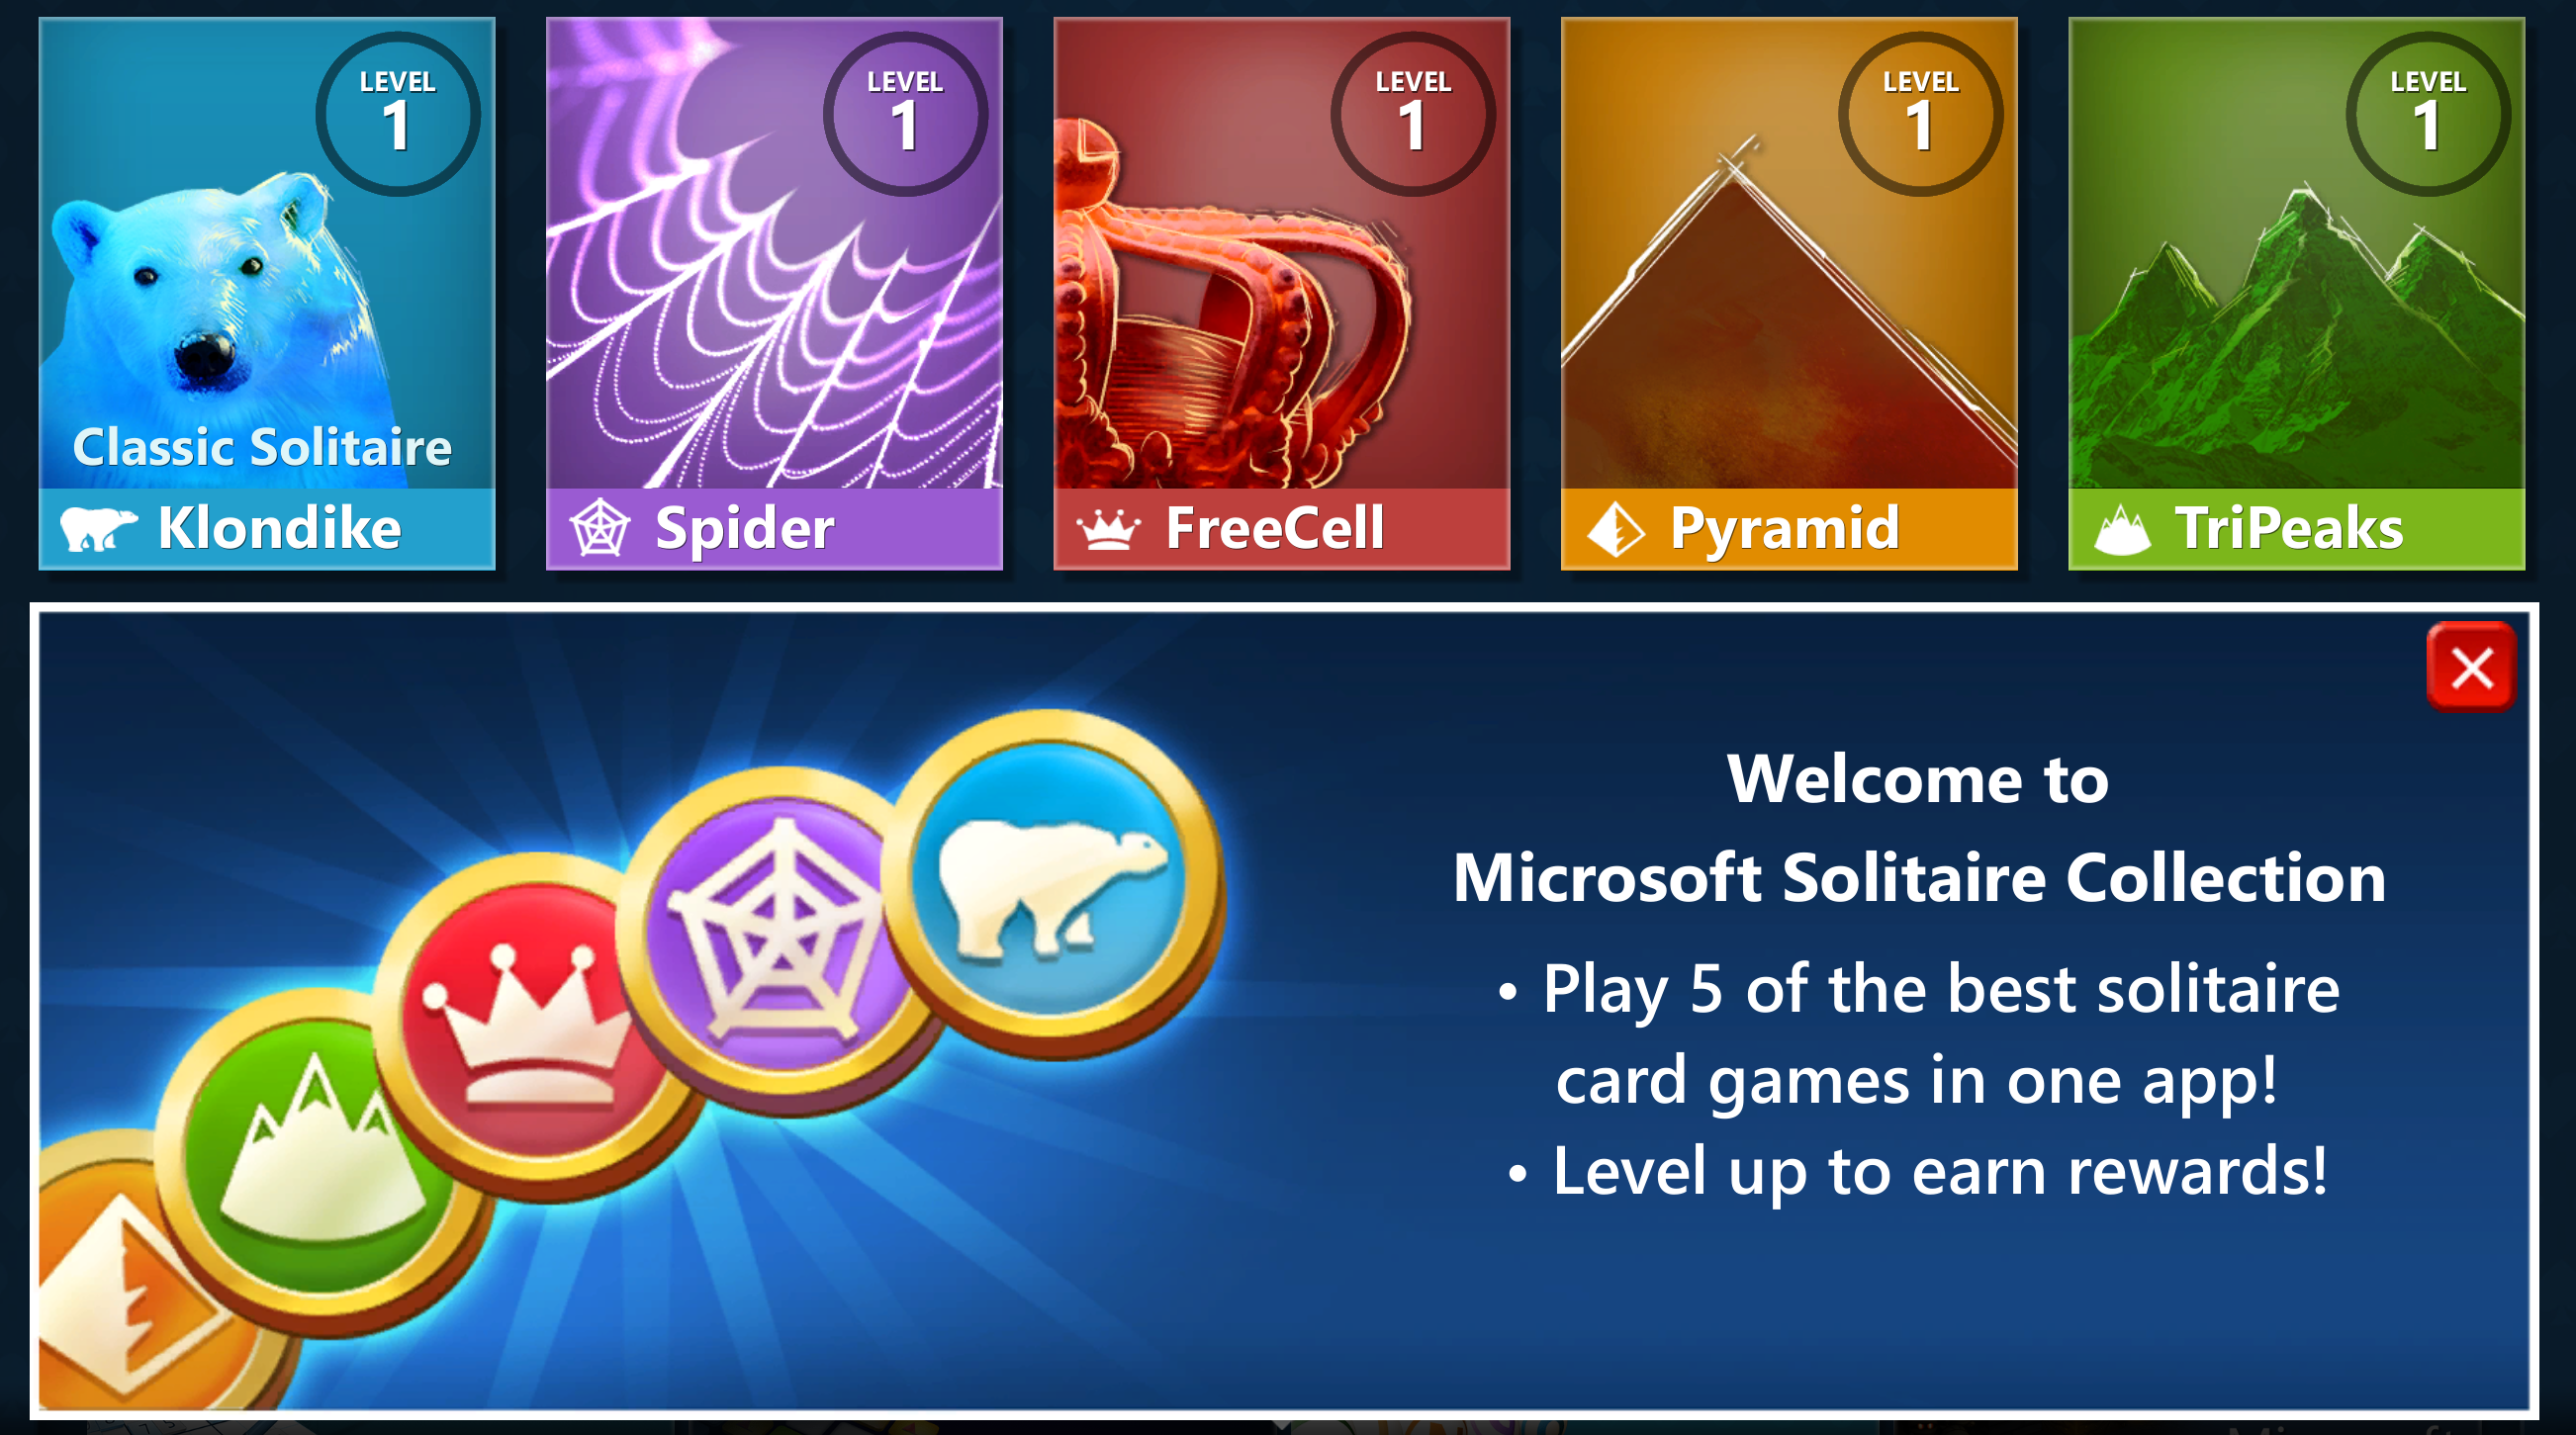 Microsoft Solitaire Collection - PCGamingWiki PCGW - bugs, fixes